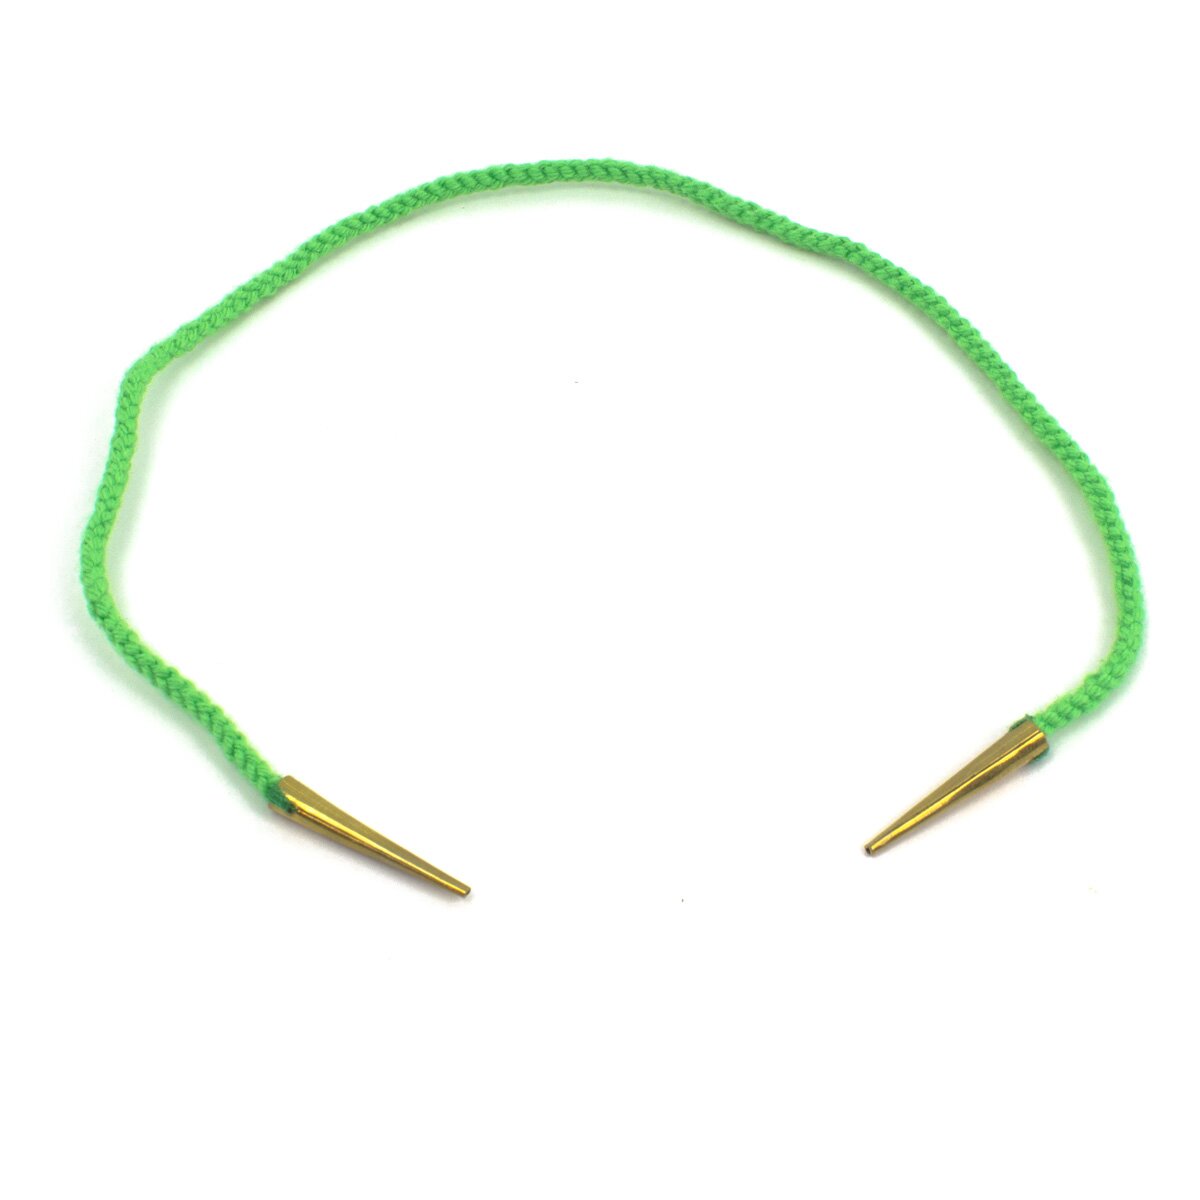 cords green with brass aglets handmade